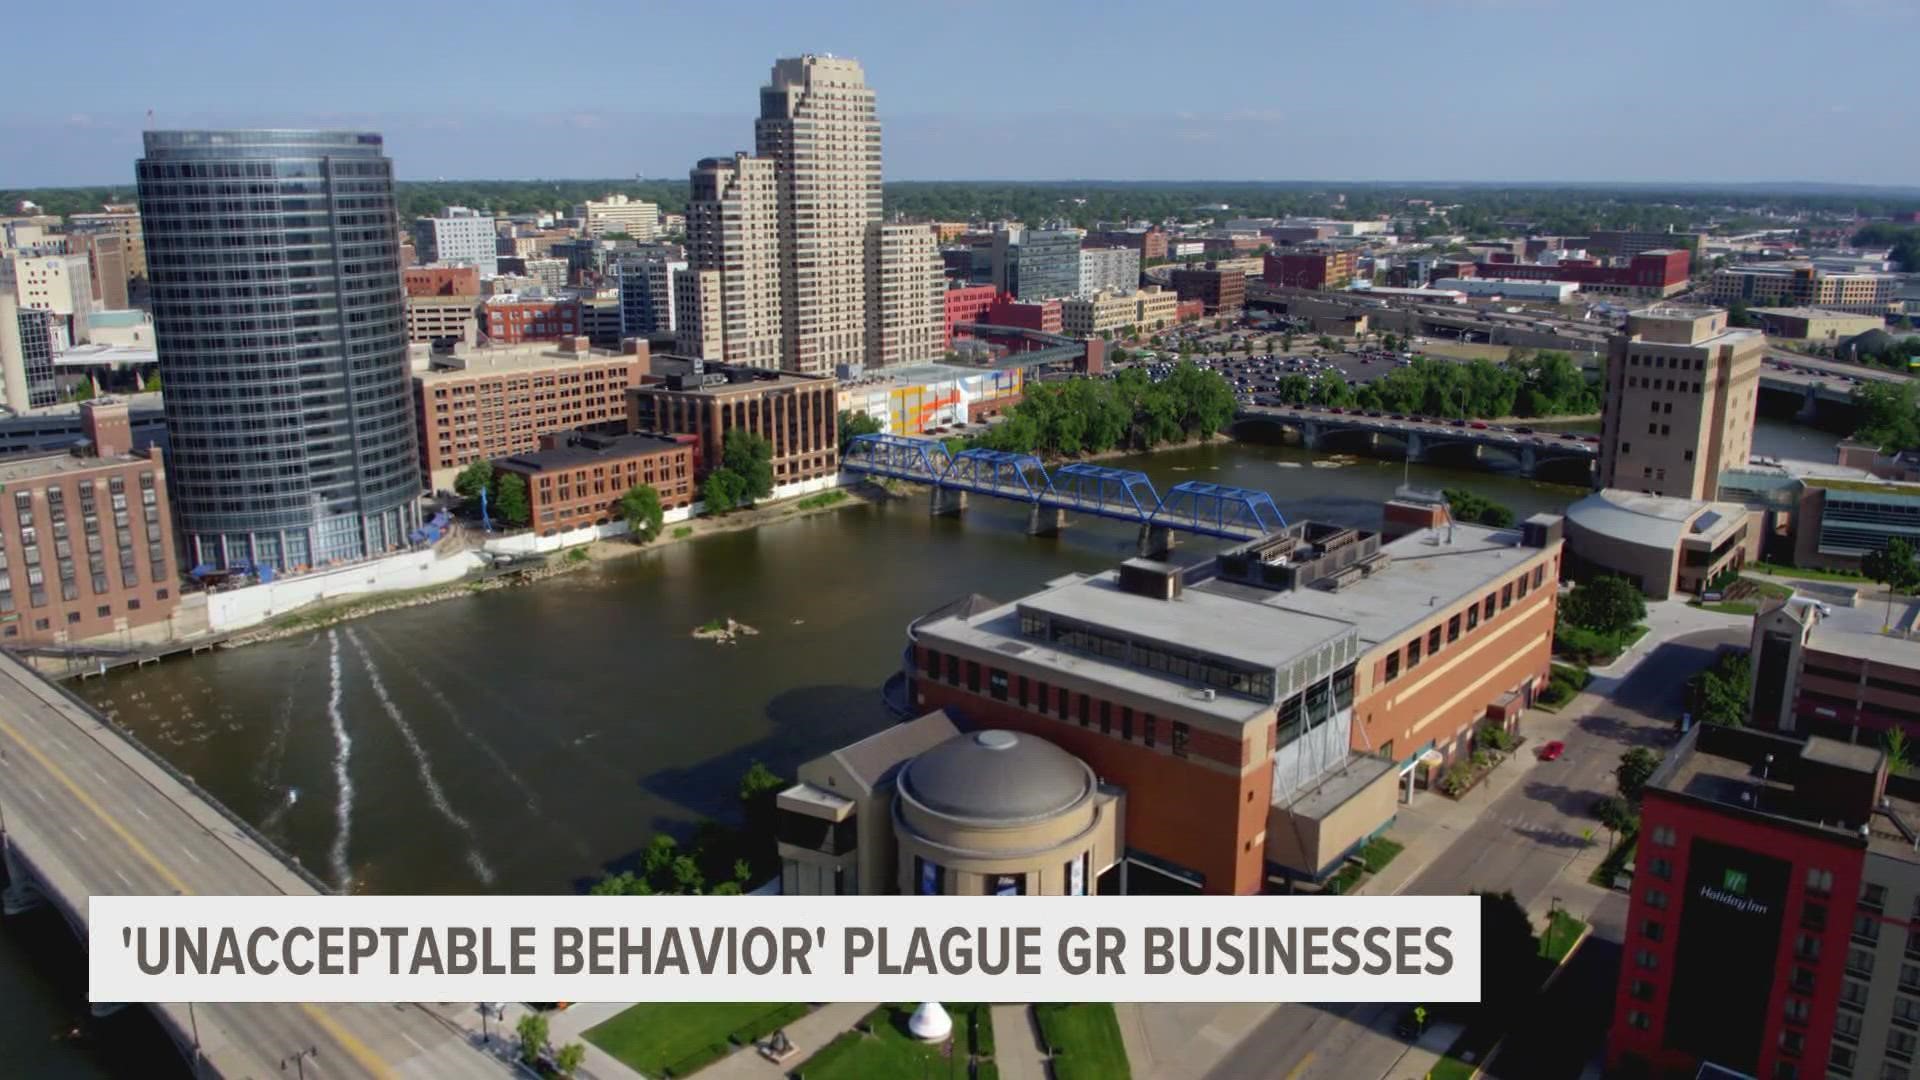 The Grand Rapids Chamber of Commerce is calling on city and public safety leaders about a rise in violent crime that is impacting businesses.